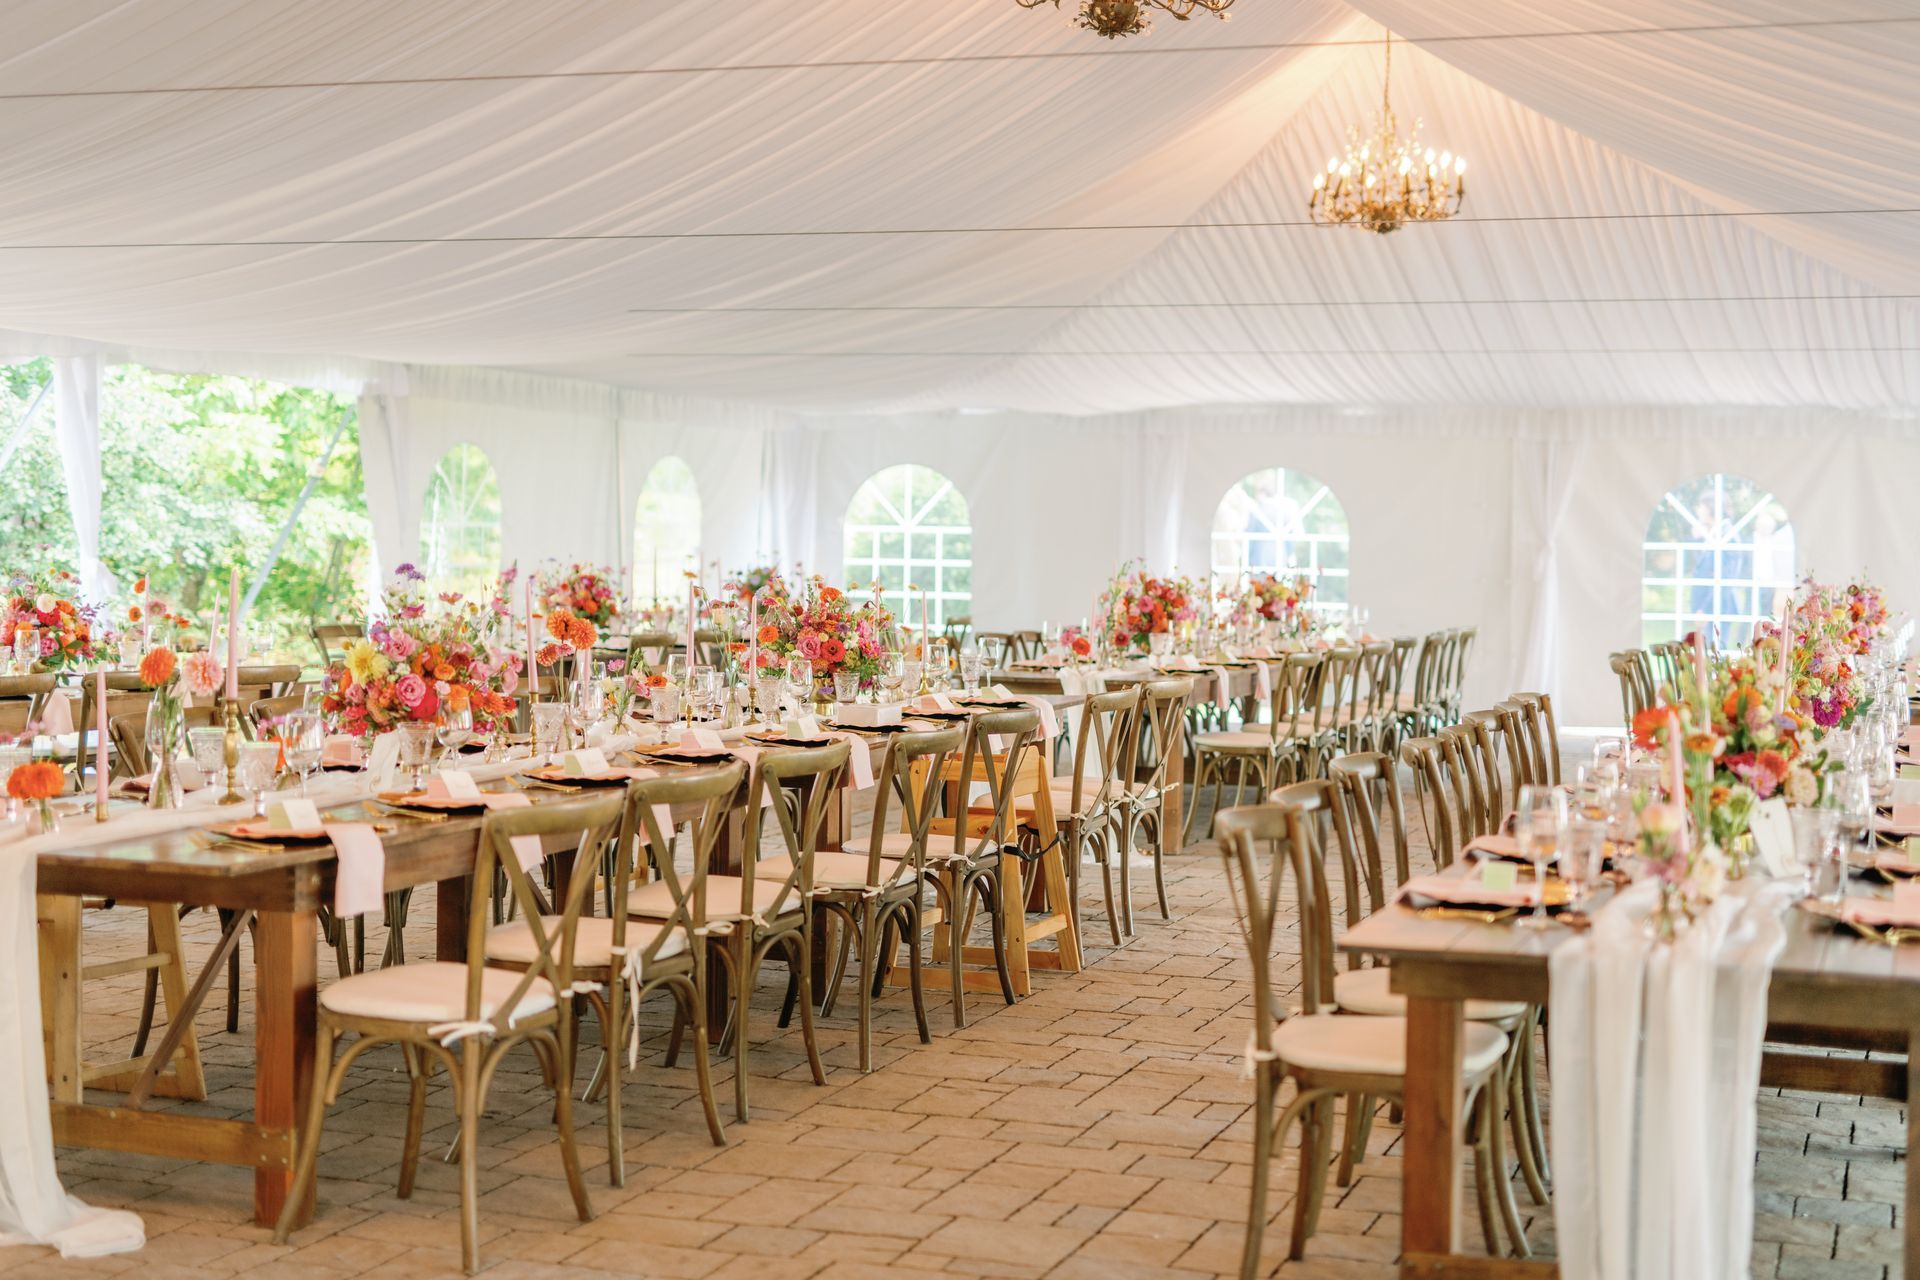 Beautiful wedding reception tent with gorgeous colors of pink all throughout